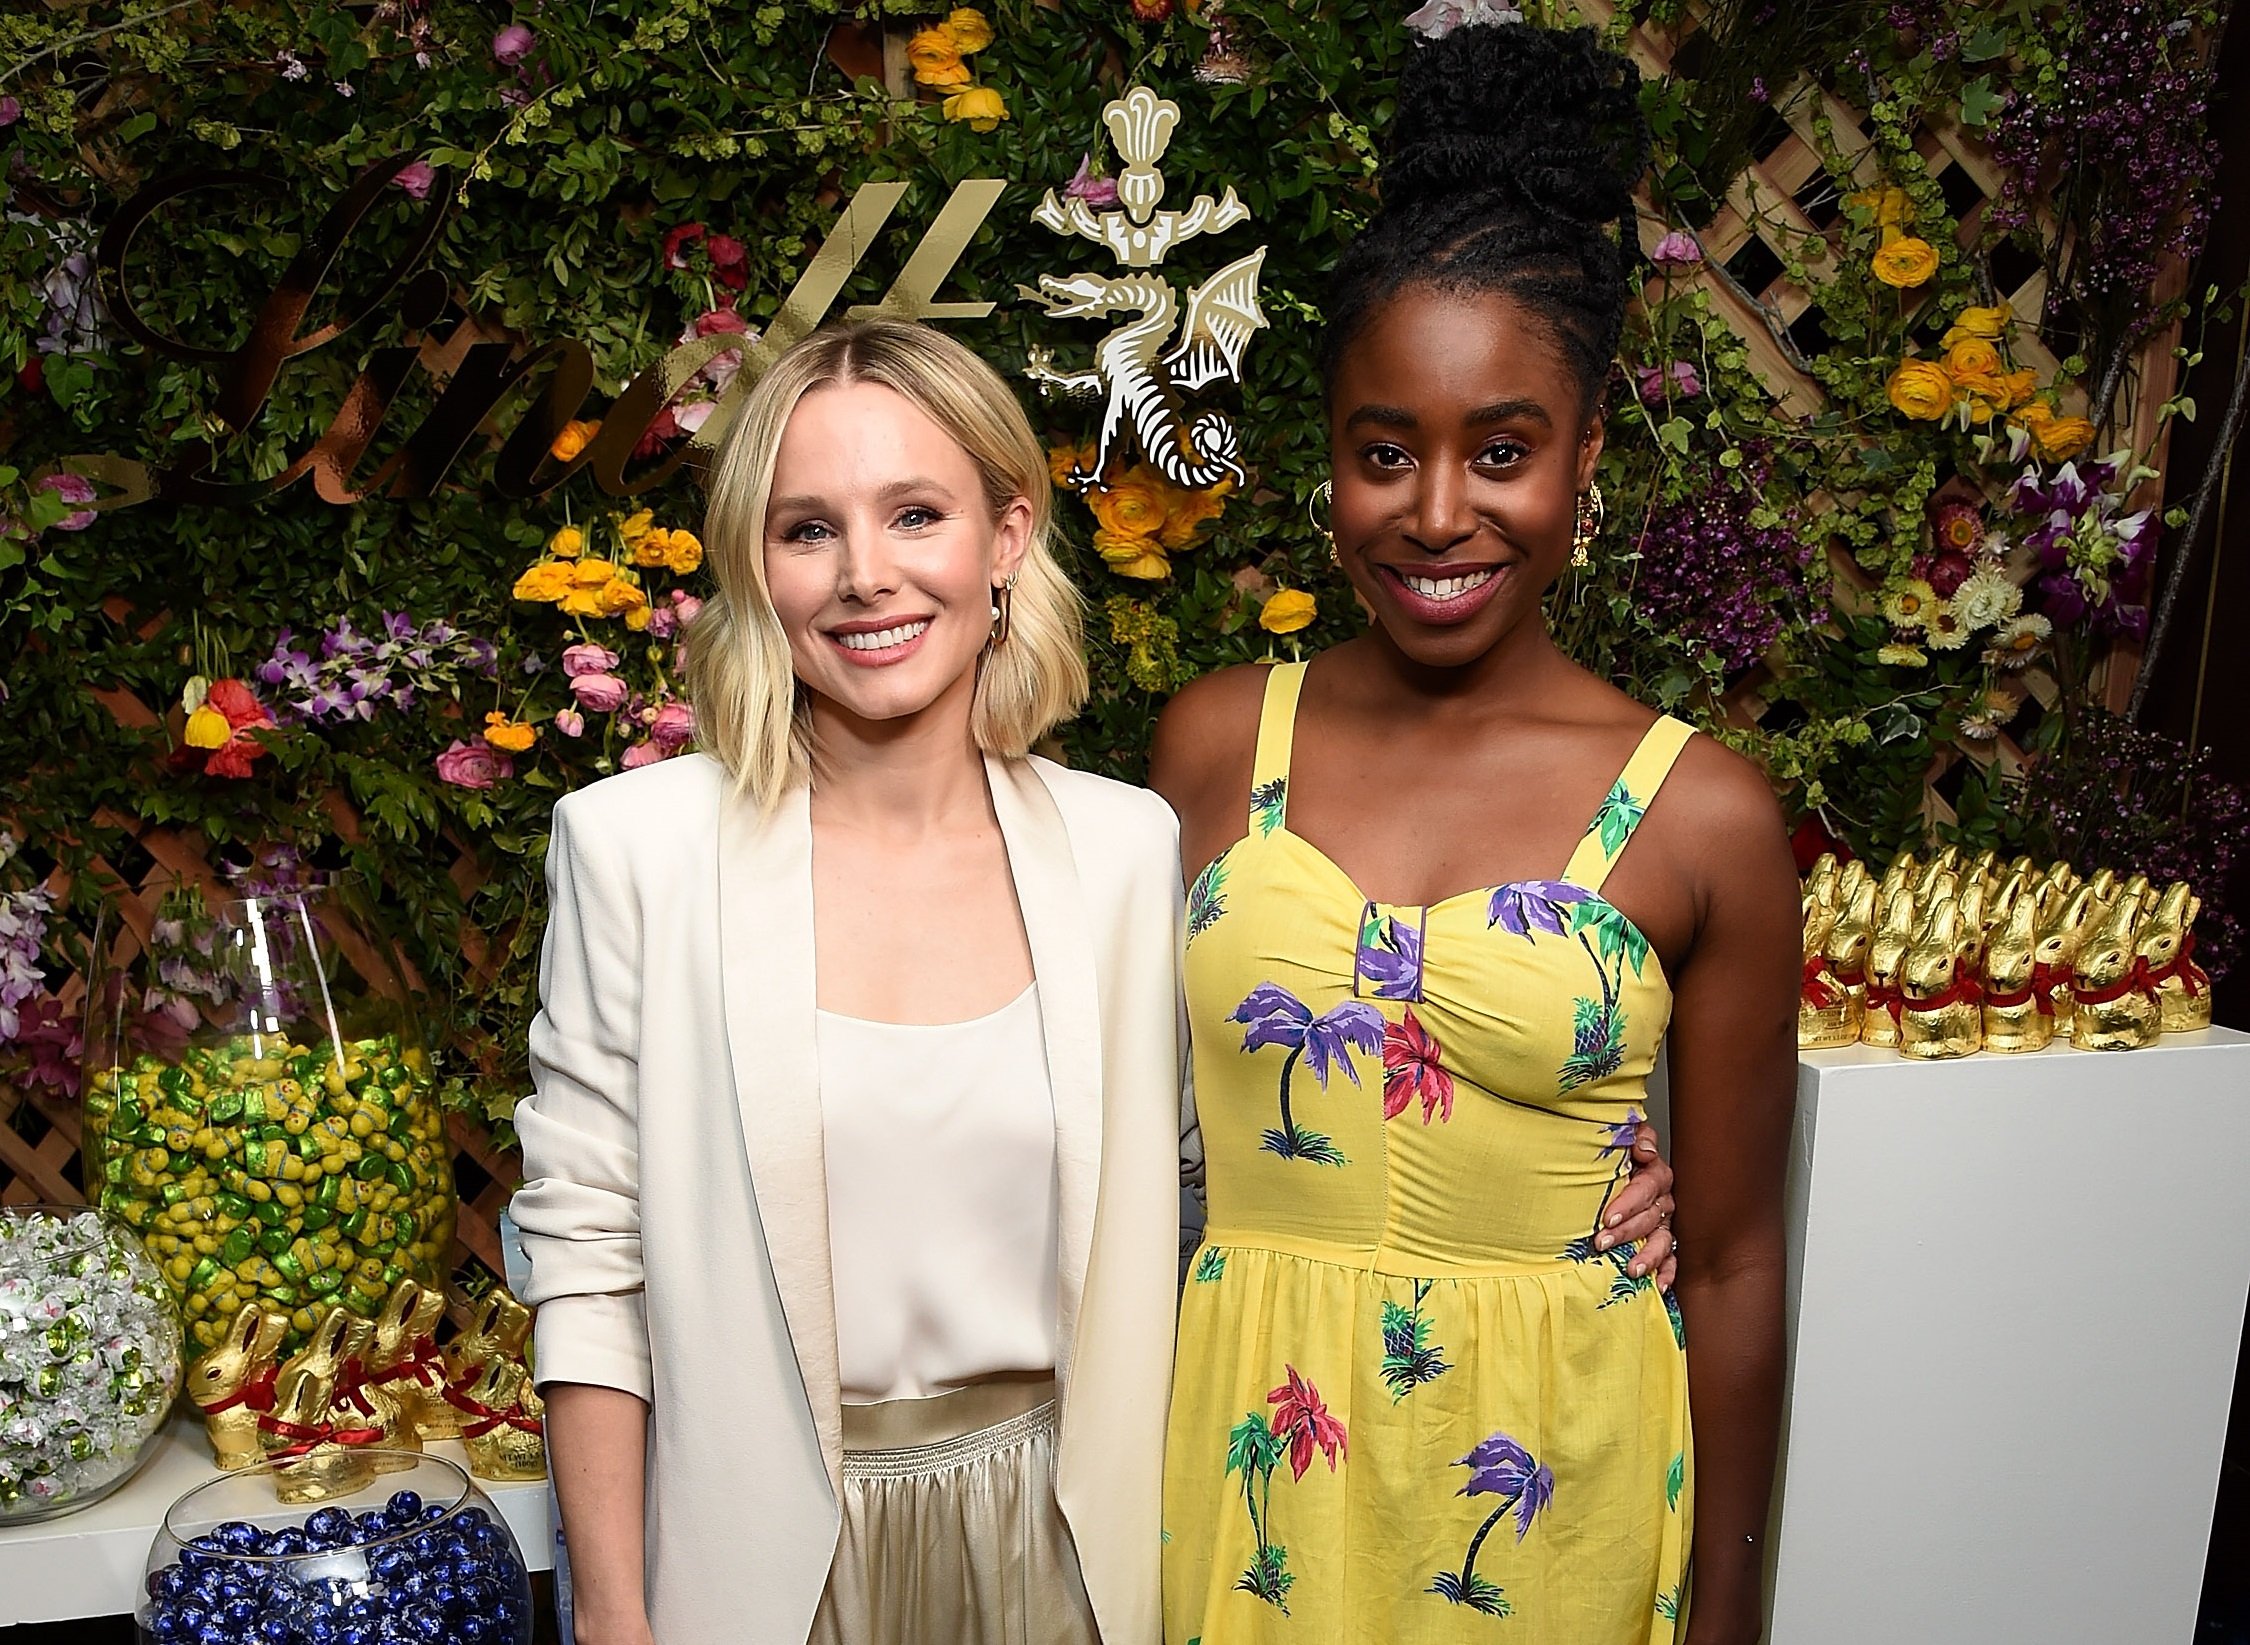 Kristen Bell (L) and Kirby Howell-Baptiste at a Lindt Chocolate Easter Luncheon with Kristen Bell and friends at Sunset Tower on April 1, 2019 in Los Angeles, California.